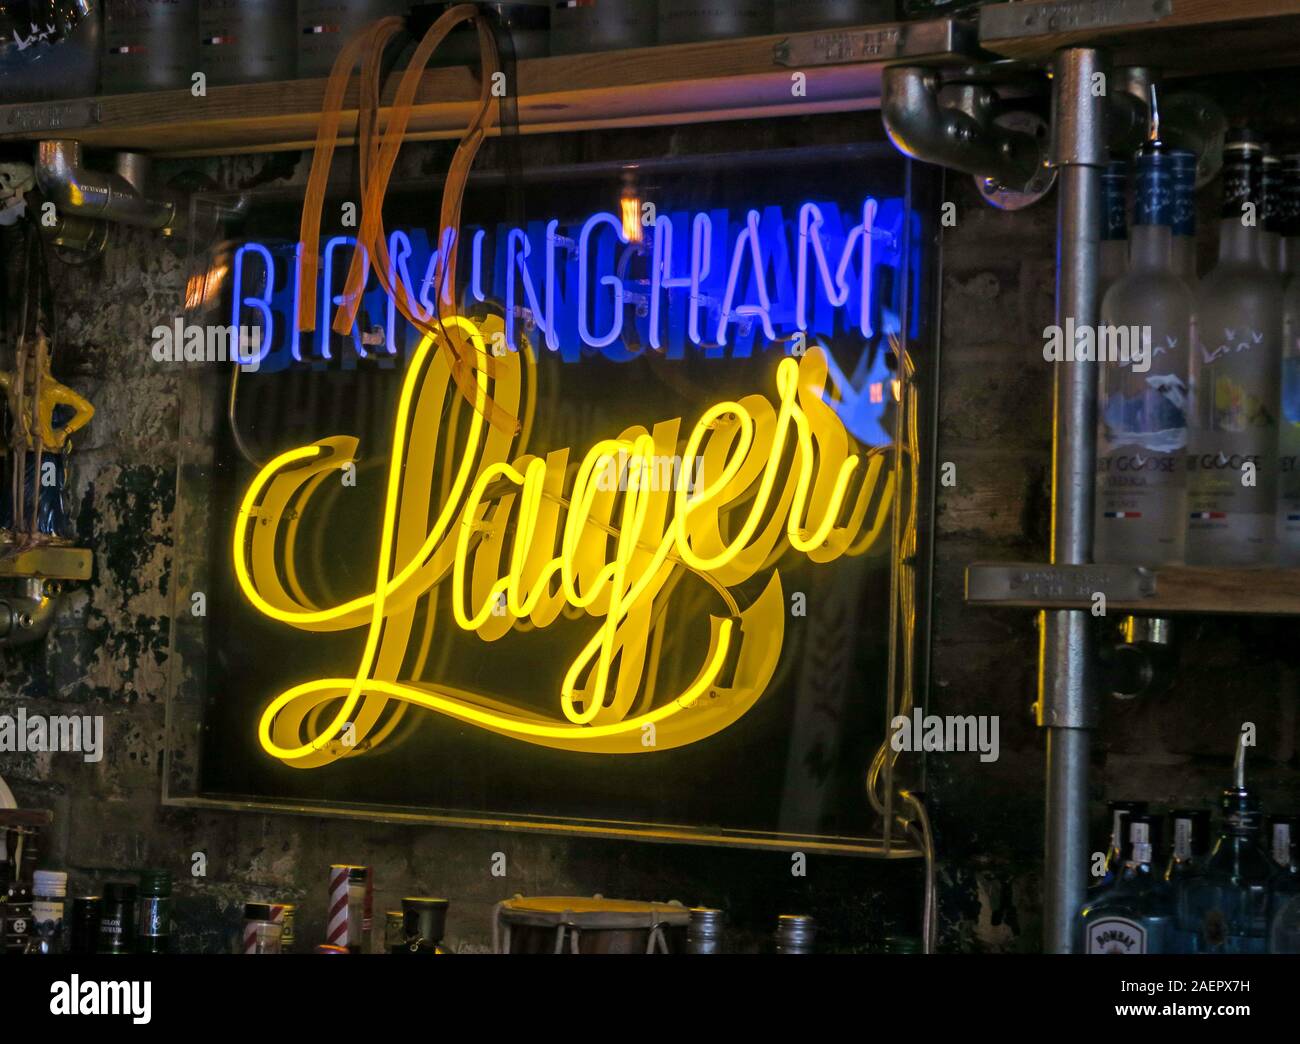 Birmingham lager signe, The Indian Brewery Company, Snowhill, Arch 16 Livery Street, Birmingham, West Midlands, Angleterre, Royaume-Uni, B3 1EU Banque D'Images